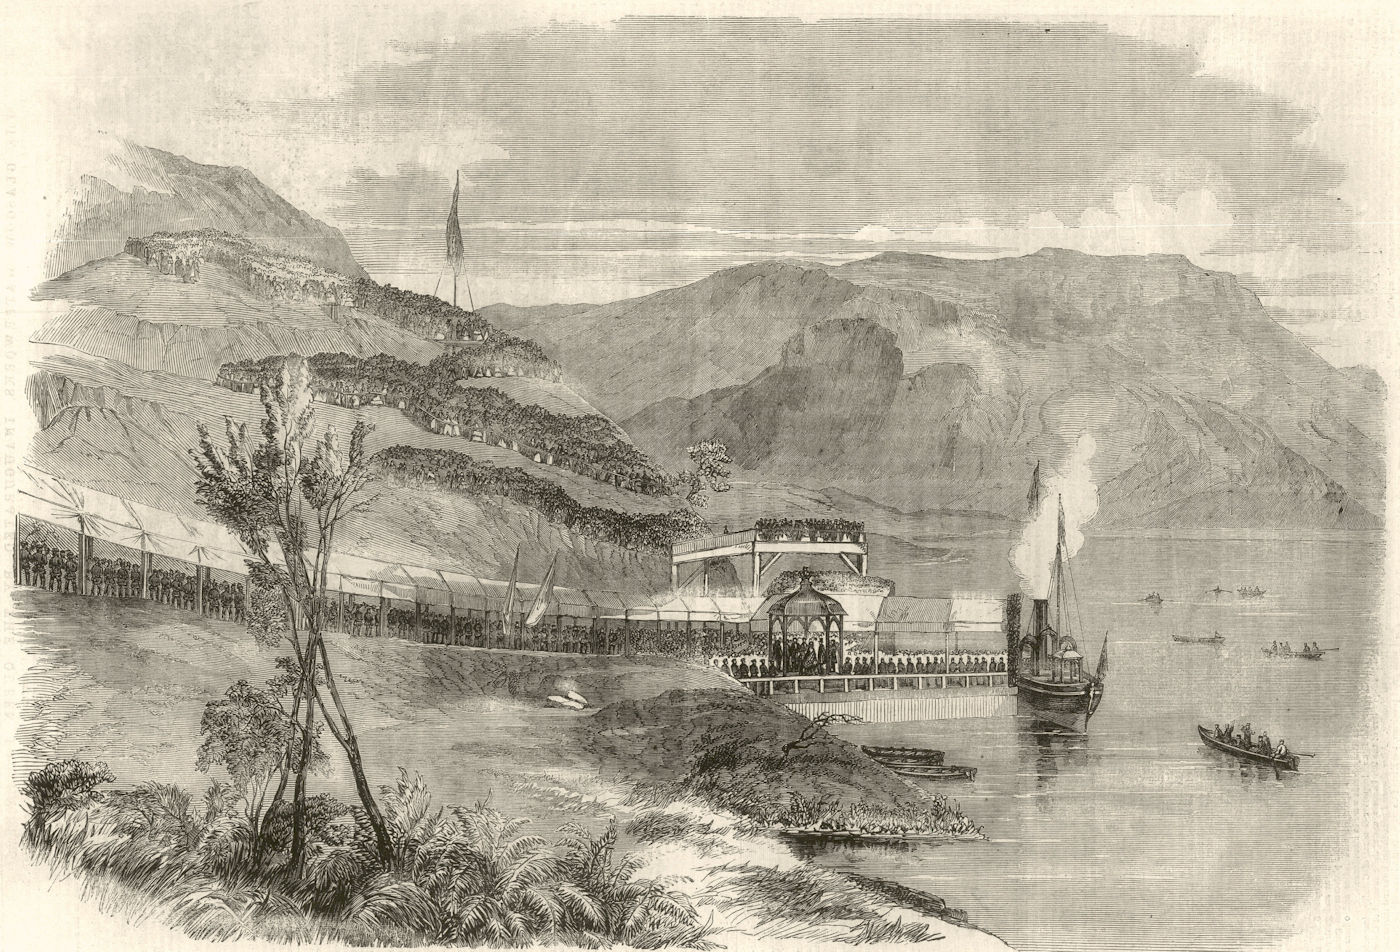 Inauguration by Queen Victoria of the Glasgow Waterworks at Loch Katrine 1859